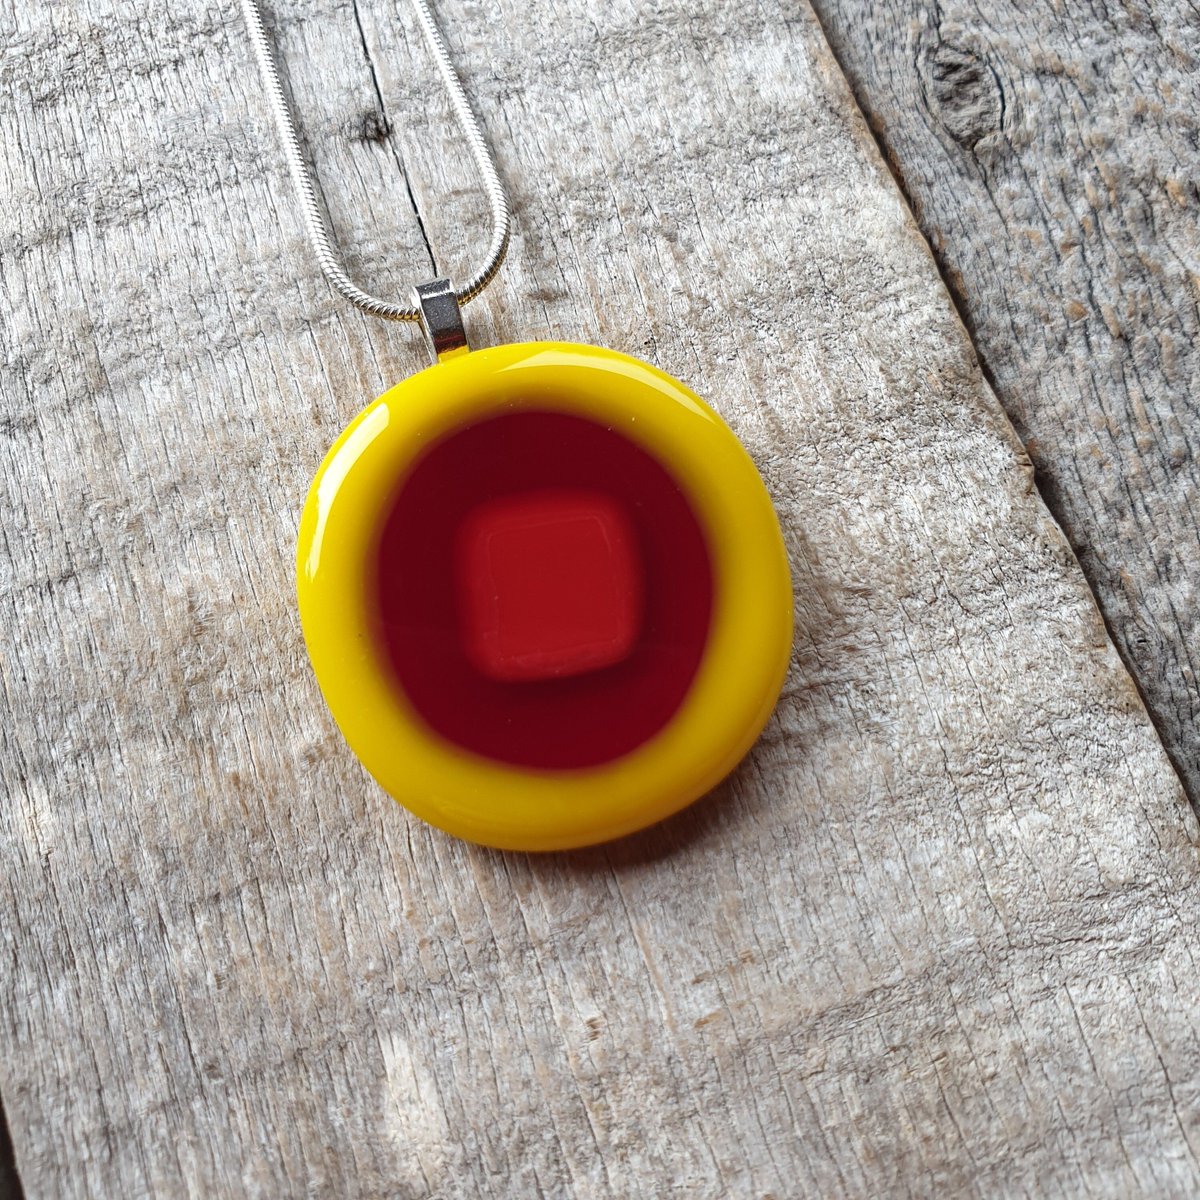 Beautiful yellow and red compressed glass necklace. Stunning unique handcrafted pendant.

#earlybiz #handmade #etsy #etsyuk #giftideas #shopindie 

buff.ly/484pLGQ